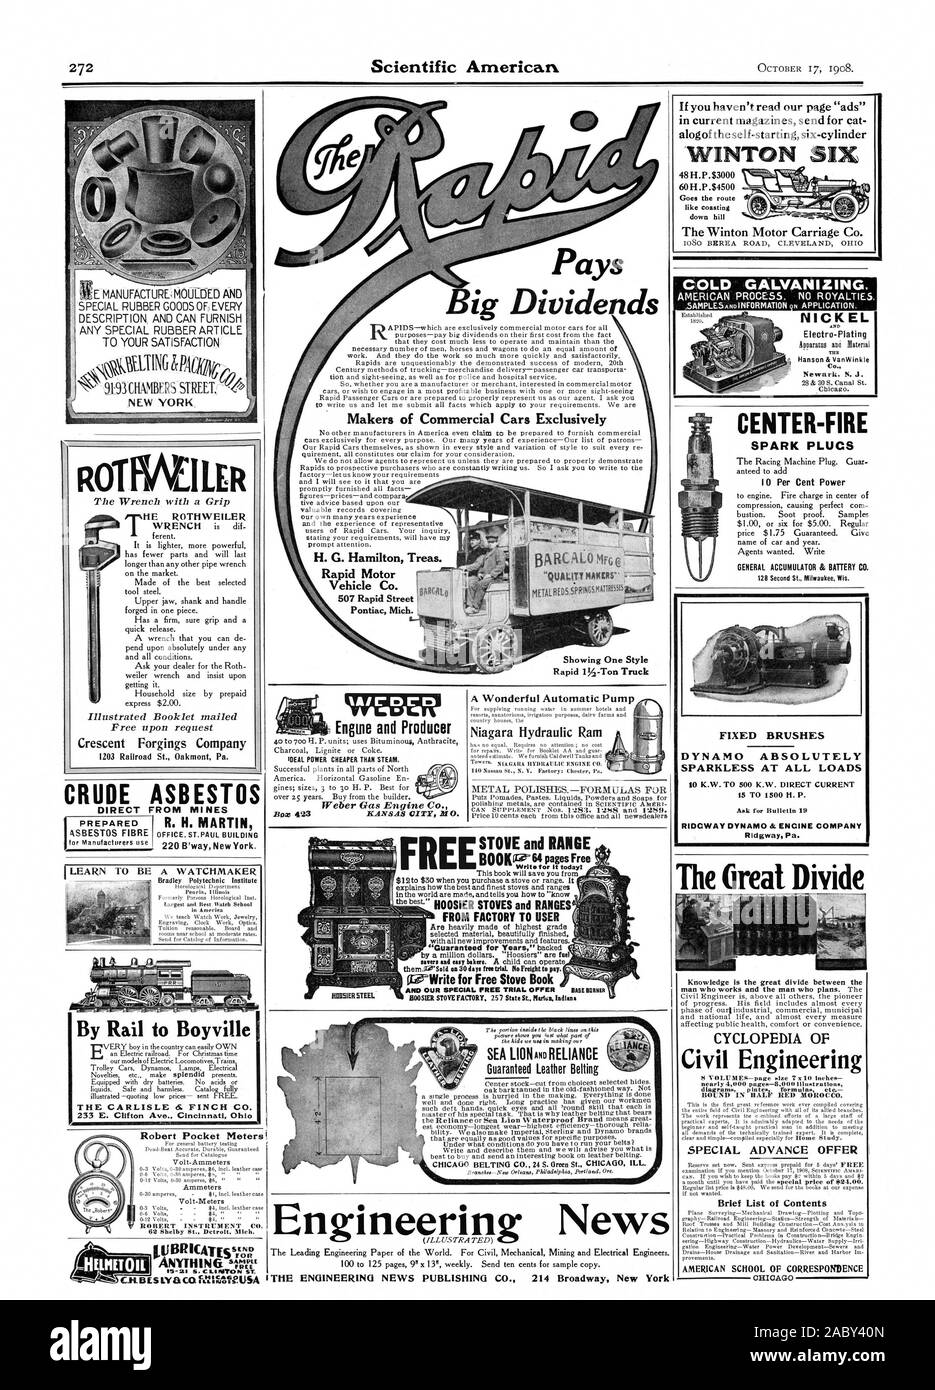 Pays Big Dividends Makers of Commercial Cars Exclusively H. G. Hamilton Treas. Rapid Motor Vehicle Co. 507 Rapid Street Pontiac Mich. 'CtliALITT IDEAL POWER CHEAPER THAN STEAM. Engine and Producer tAir Trim FROM FACTORY TO USER HOOSIER STOVE FACTORY 257 State SL Harlot Indiana Engineering News 13-21 S. C LINTON ST. NEW YORK RoTMEILER 1203 Railroad St. Oakmont Pa. CRUDE ASBESTOS DIRECT FROM MINES I PREPARED ASBESTOS FIBRE I LEARN TO BE By Rail to Boyville THE CARLISLE 6. FINCH CO. 233 E. Clifton Ave. Cincinnati Ohi Robert Pocket Meters Ammeters ROBERT INSTREMEN'T CO. 62 Shelby St. Detroit Mich Stock Photo